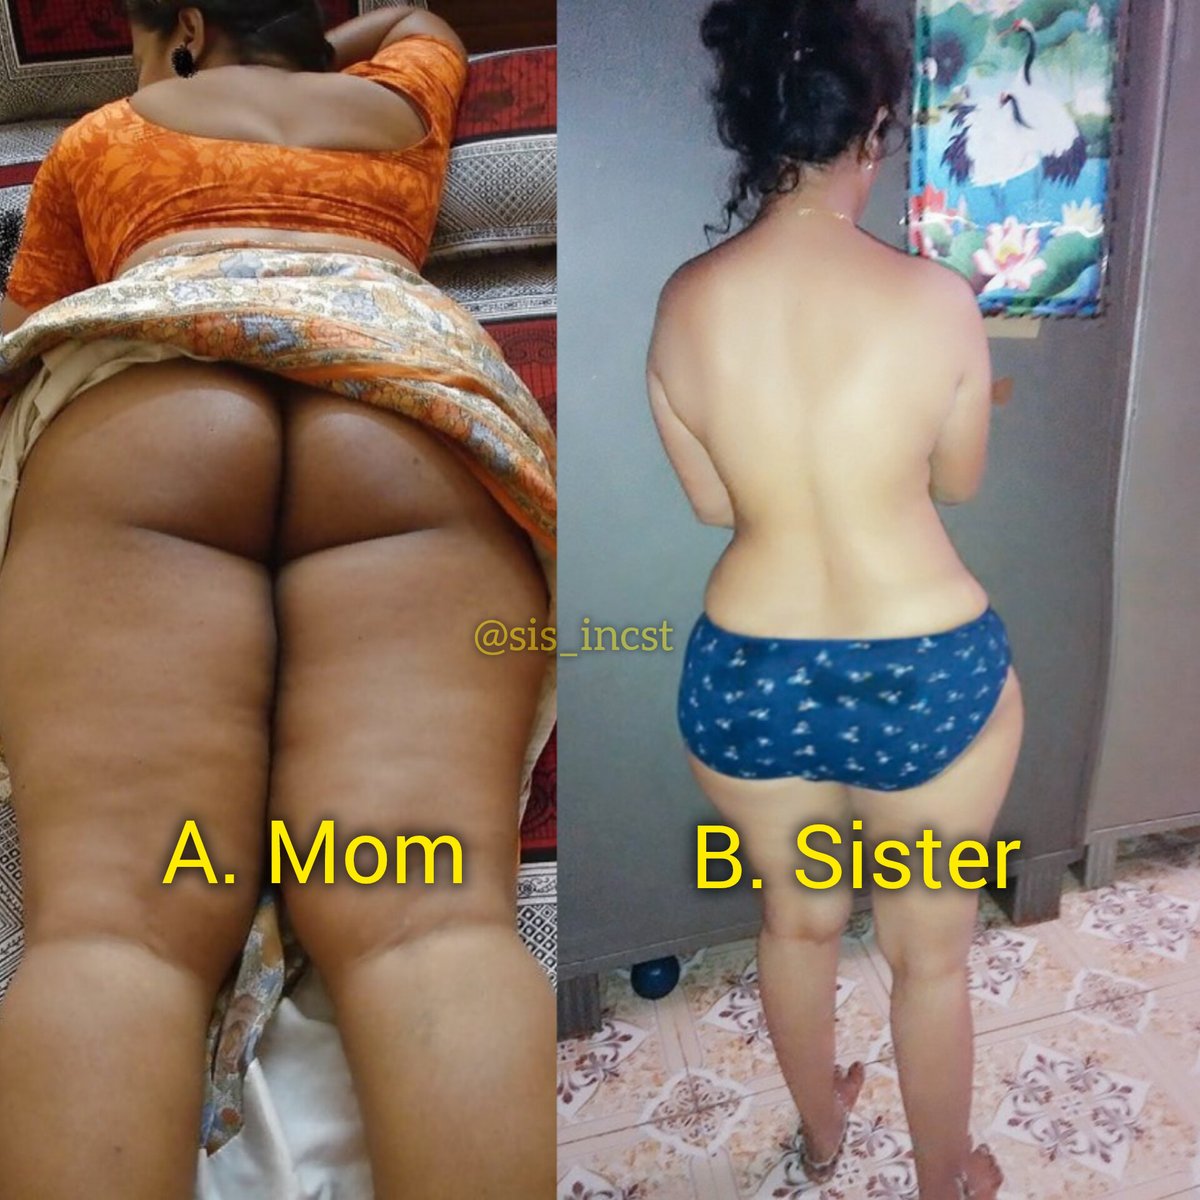 Incsts, Who do you want to fuxk at home? 🍆💦💦💦 Tum ghar mein kisko ch#dna chahte ho batao? Submit your Mom/Sis name in DM.